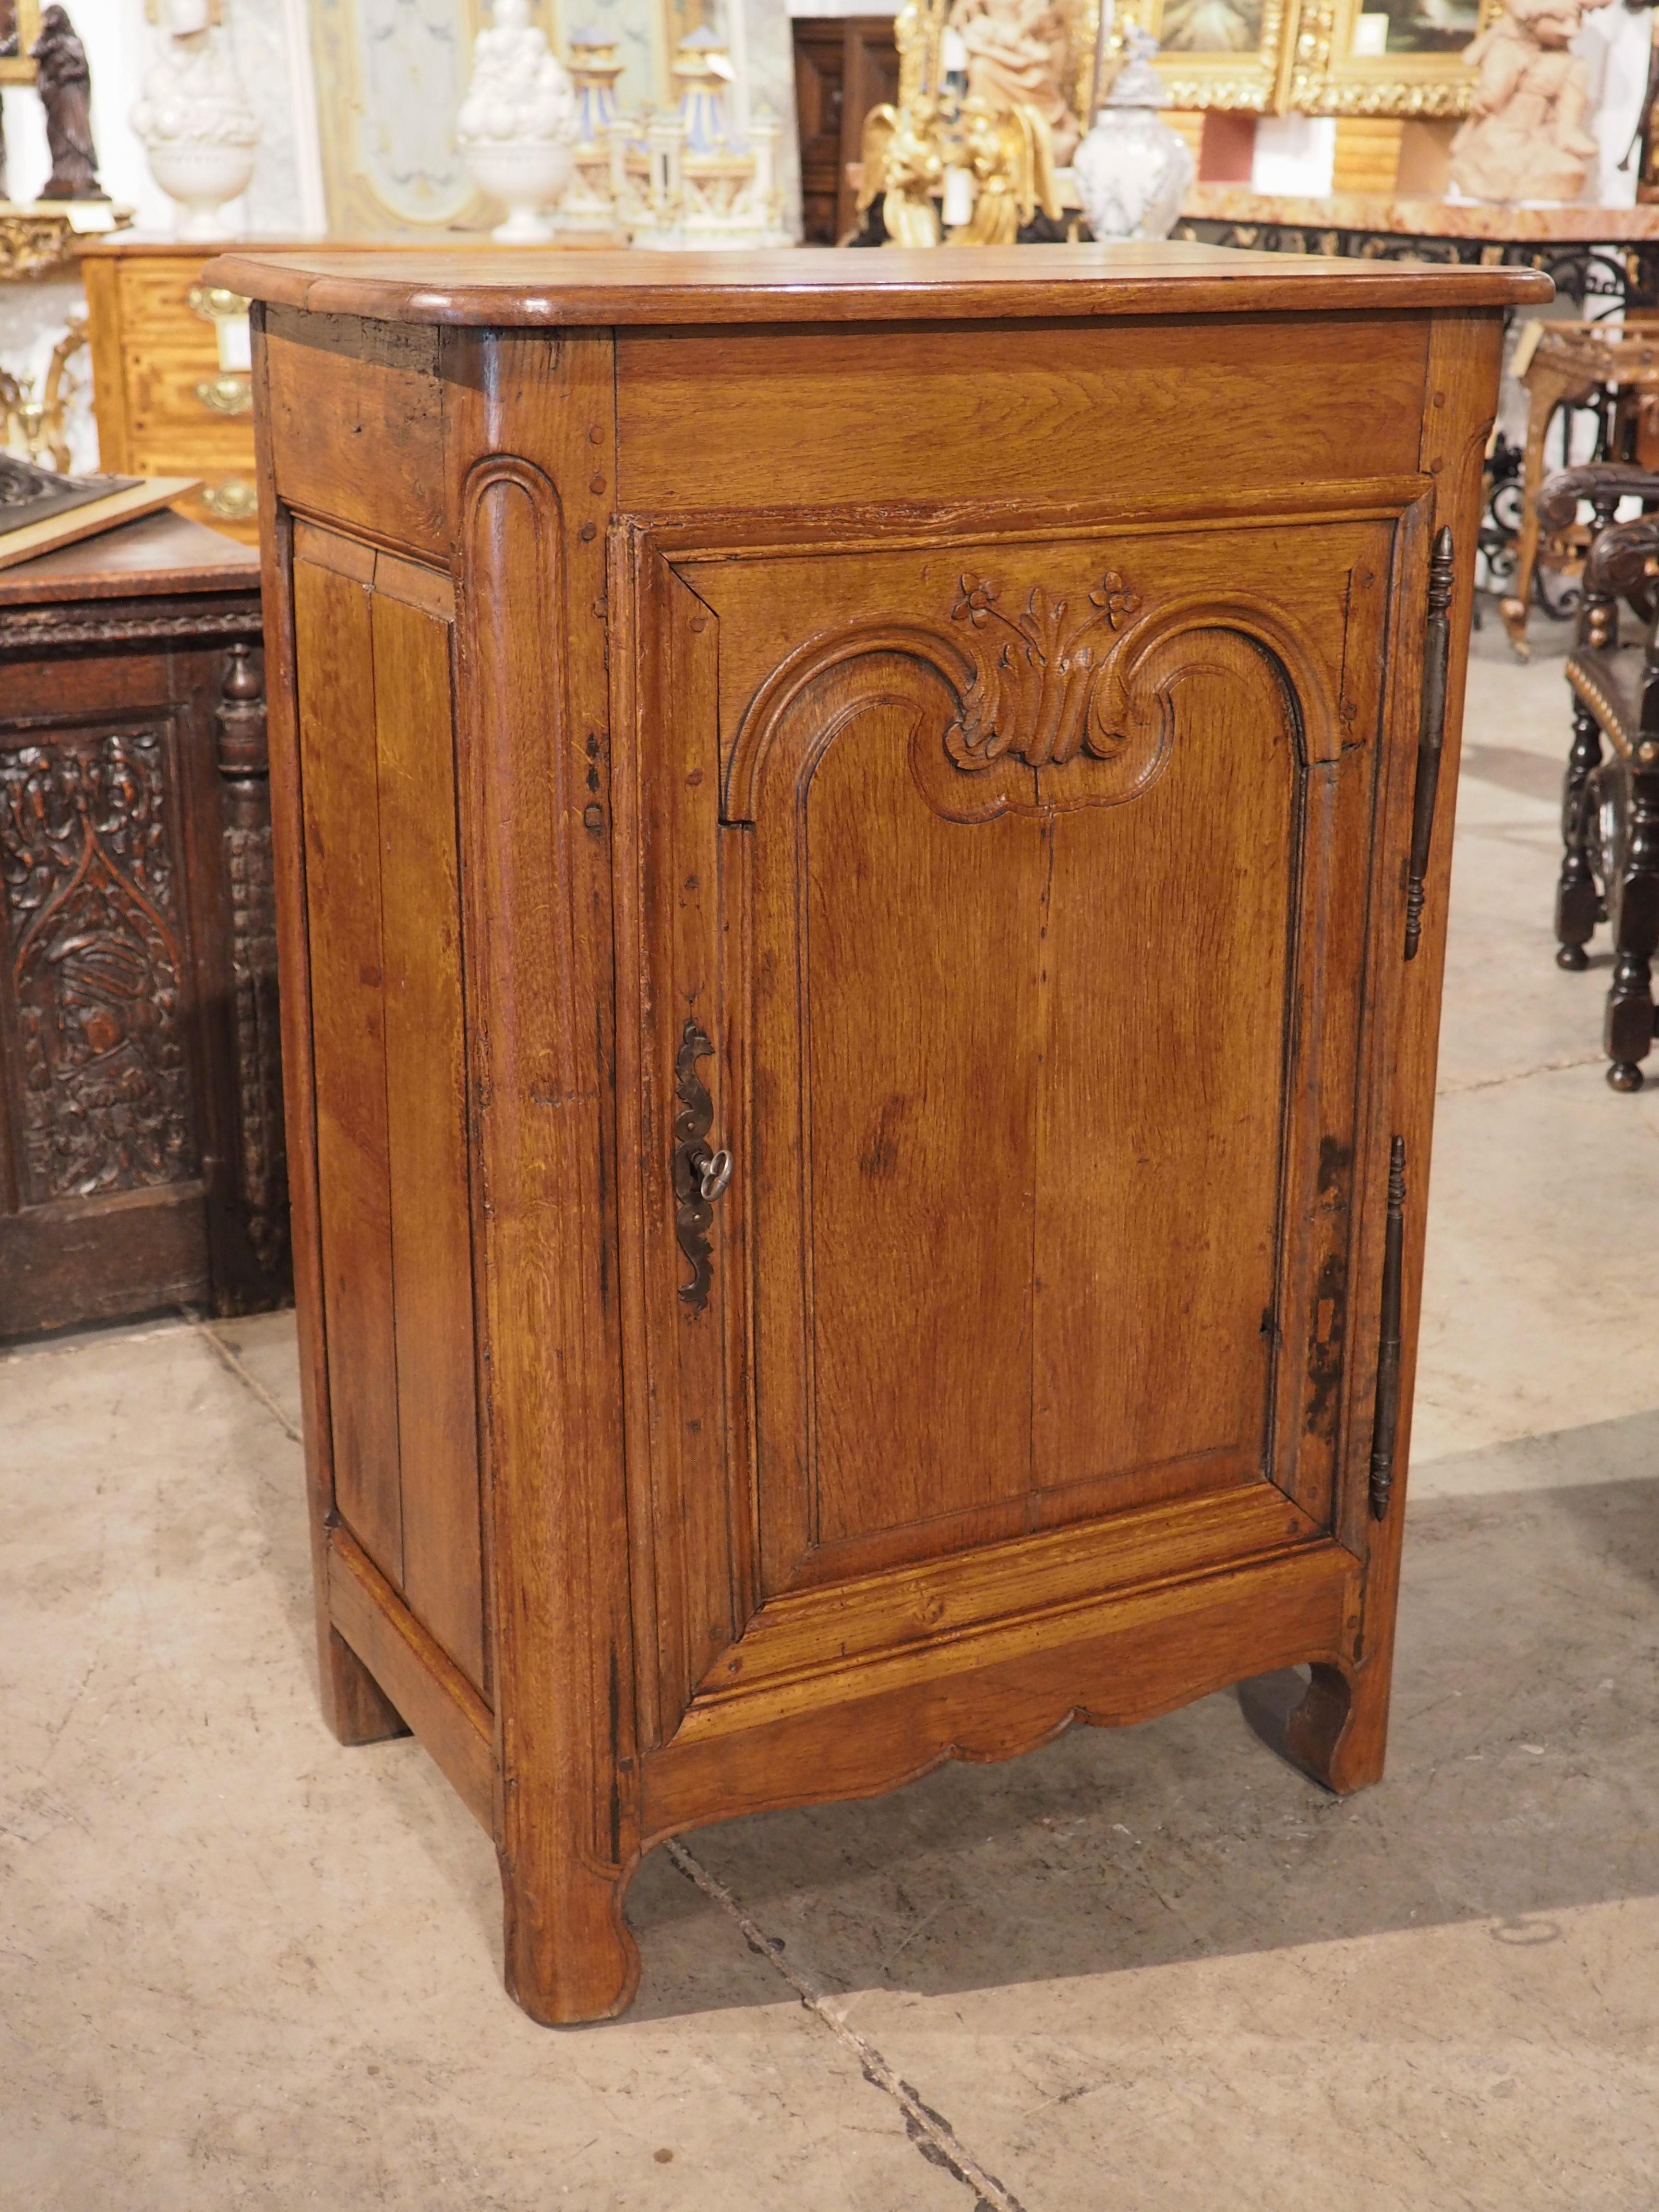 This 19th-century oak confiturier cabinet from Normandy, is an excellent display of the  fine craftsmanship of regional French woodworkers of the 1800s. The thick molding to the door, with its intricate floral bush at the top, adds a touch of